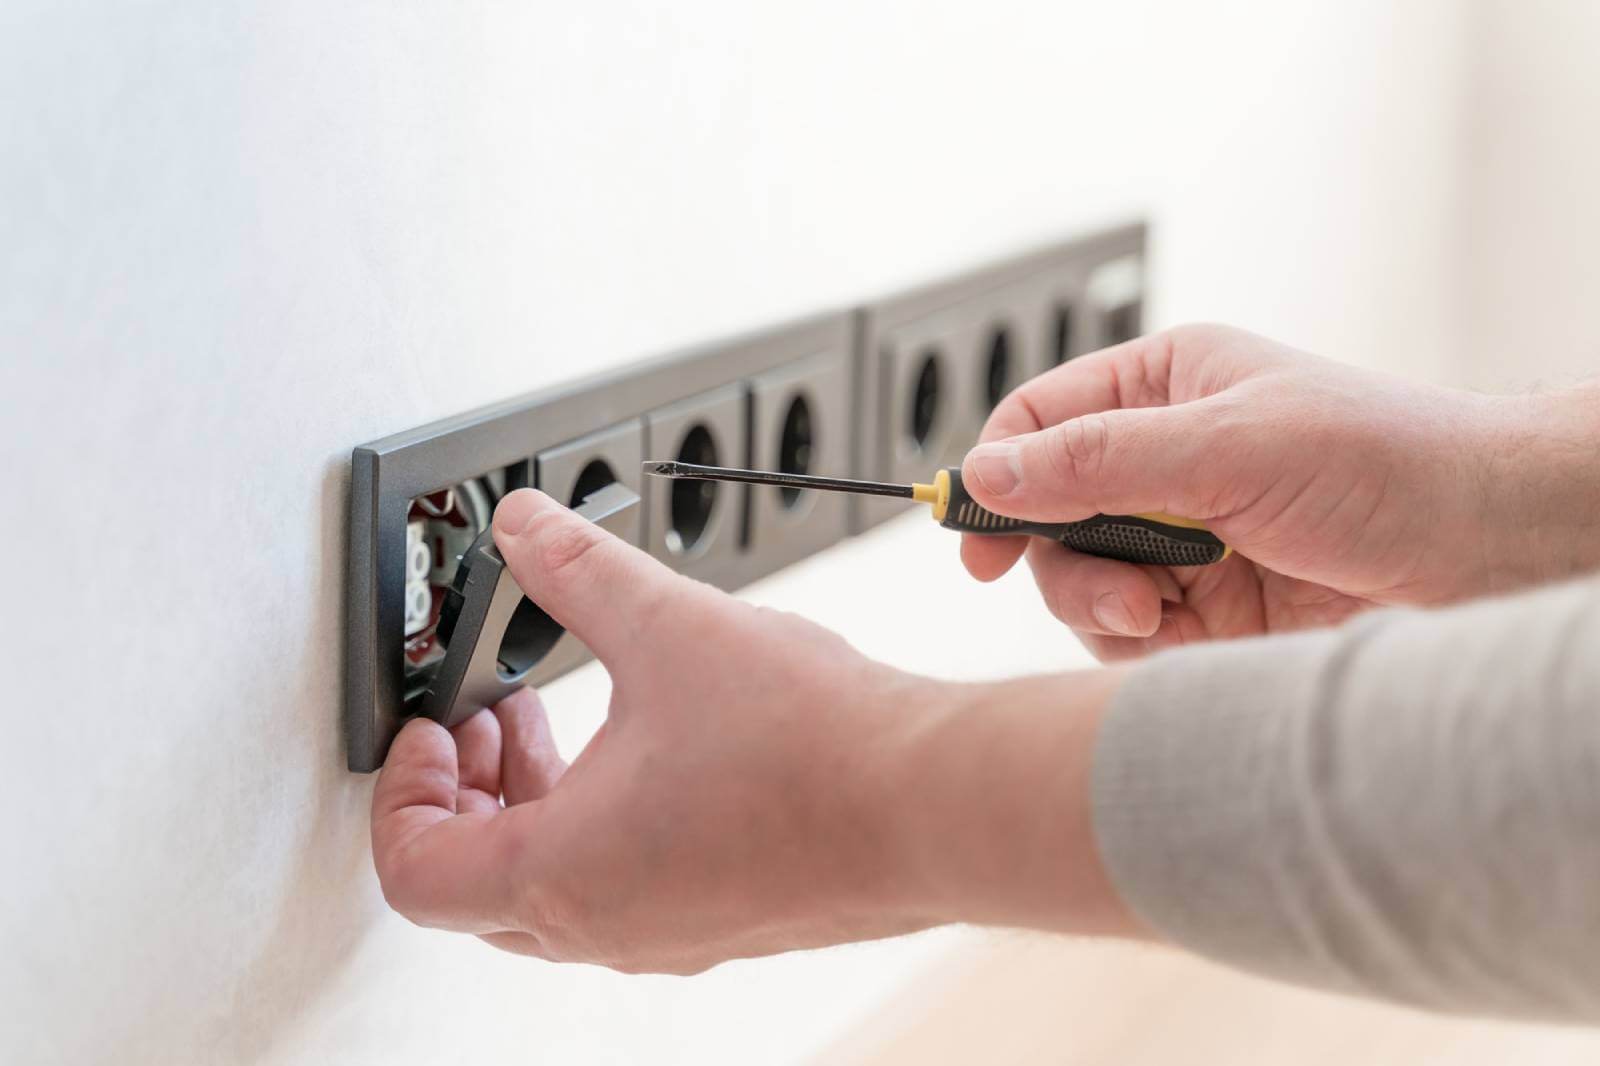 ACS worker with black screwdriver fixing black outlet